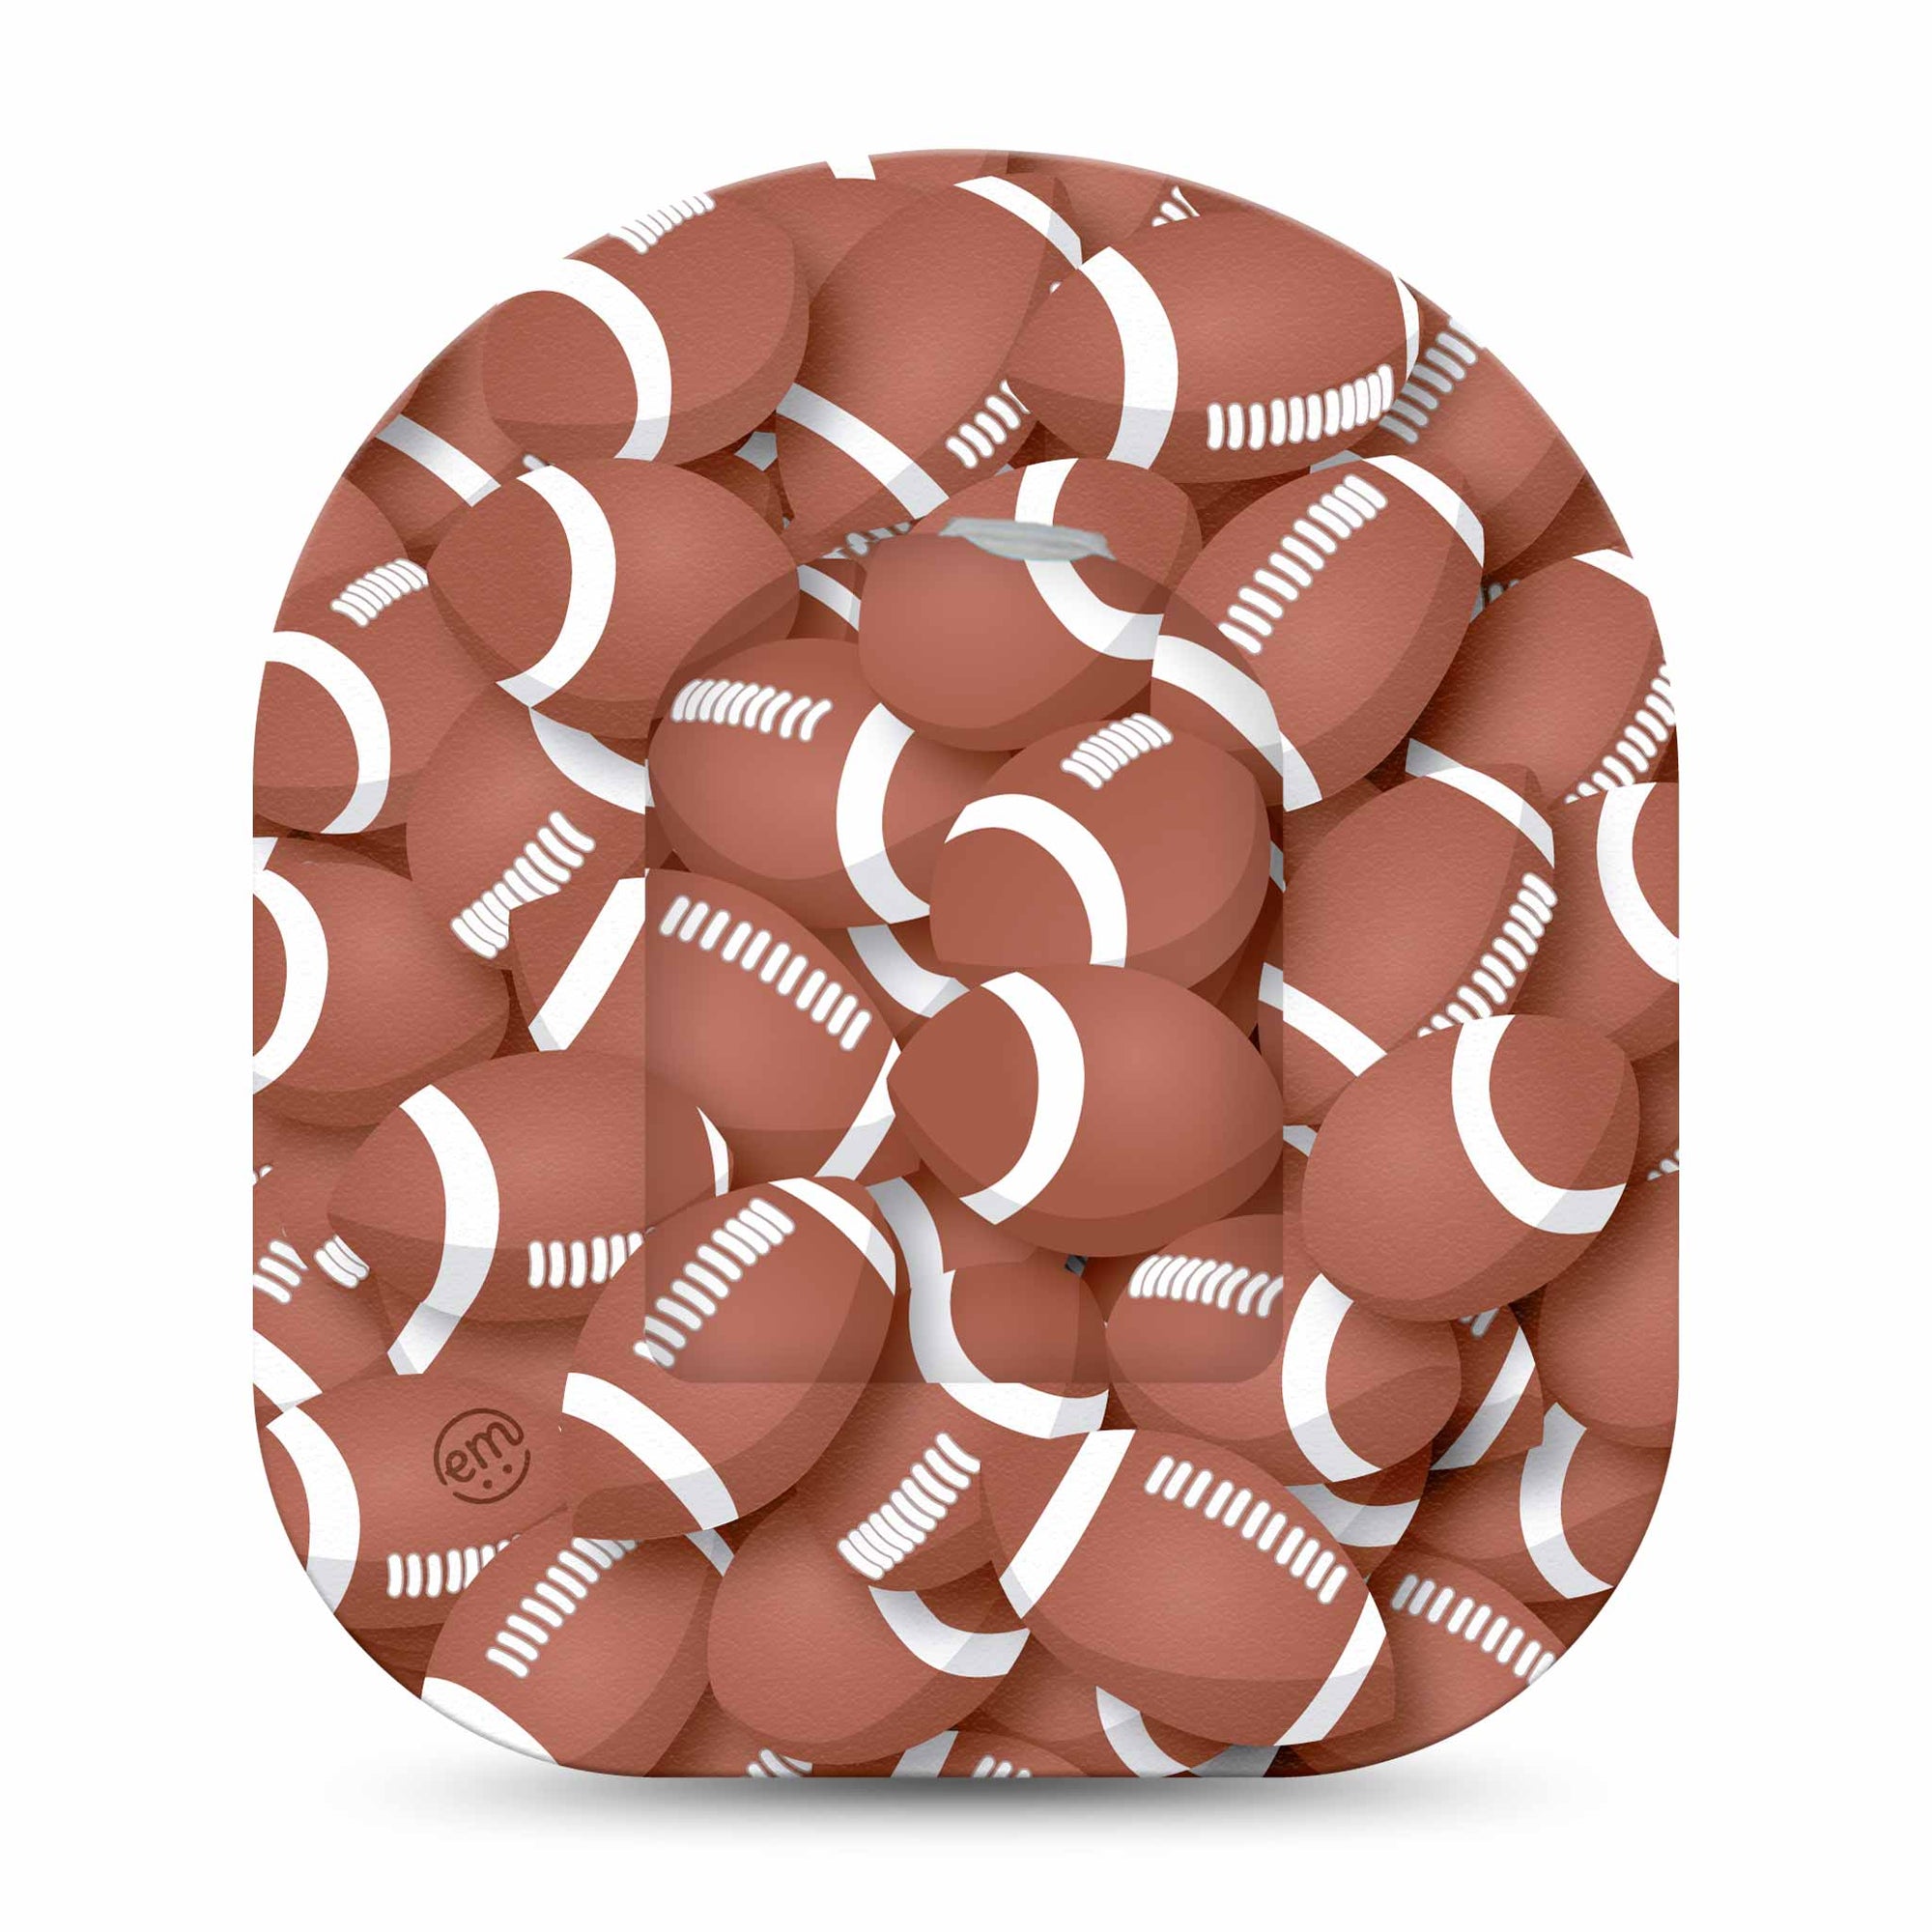 ExpressionMed Football Omnipod Pump Sticker and Matching Football Adhesive Patch